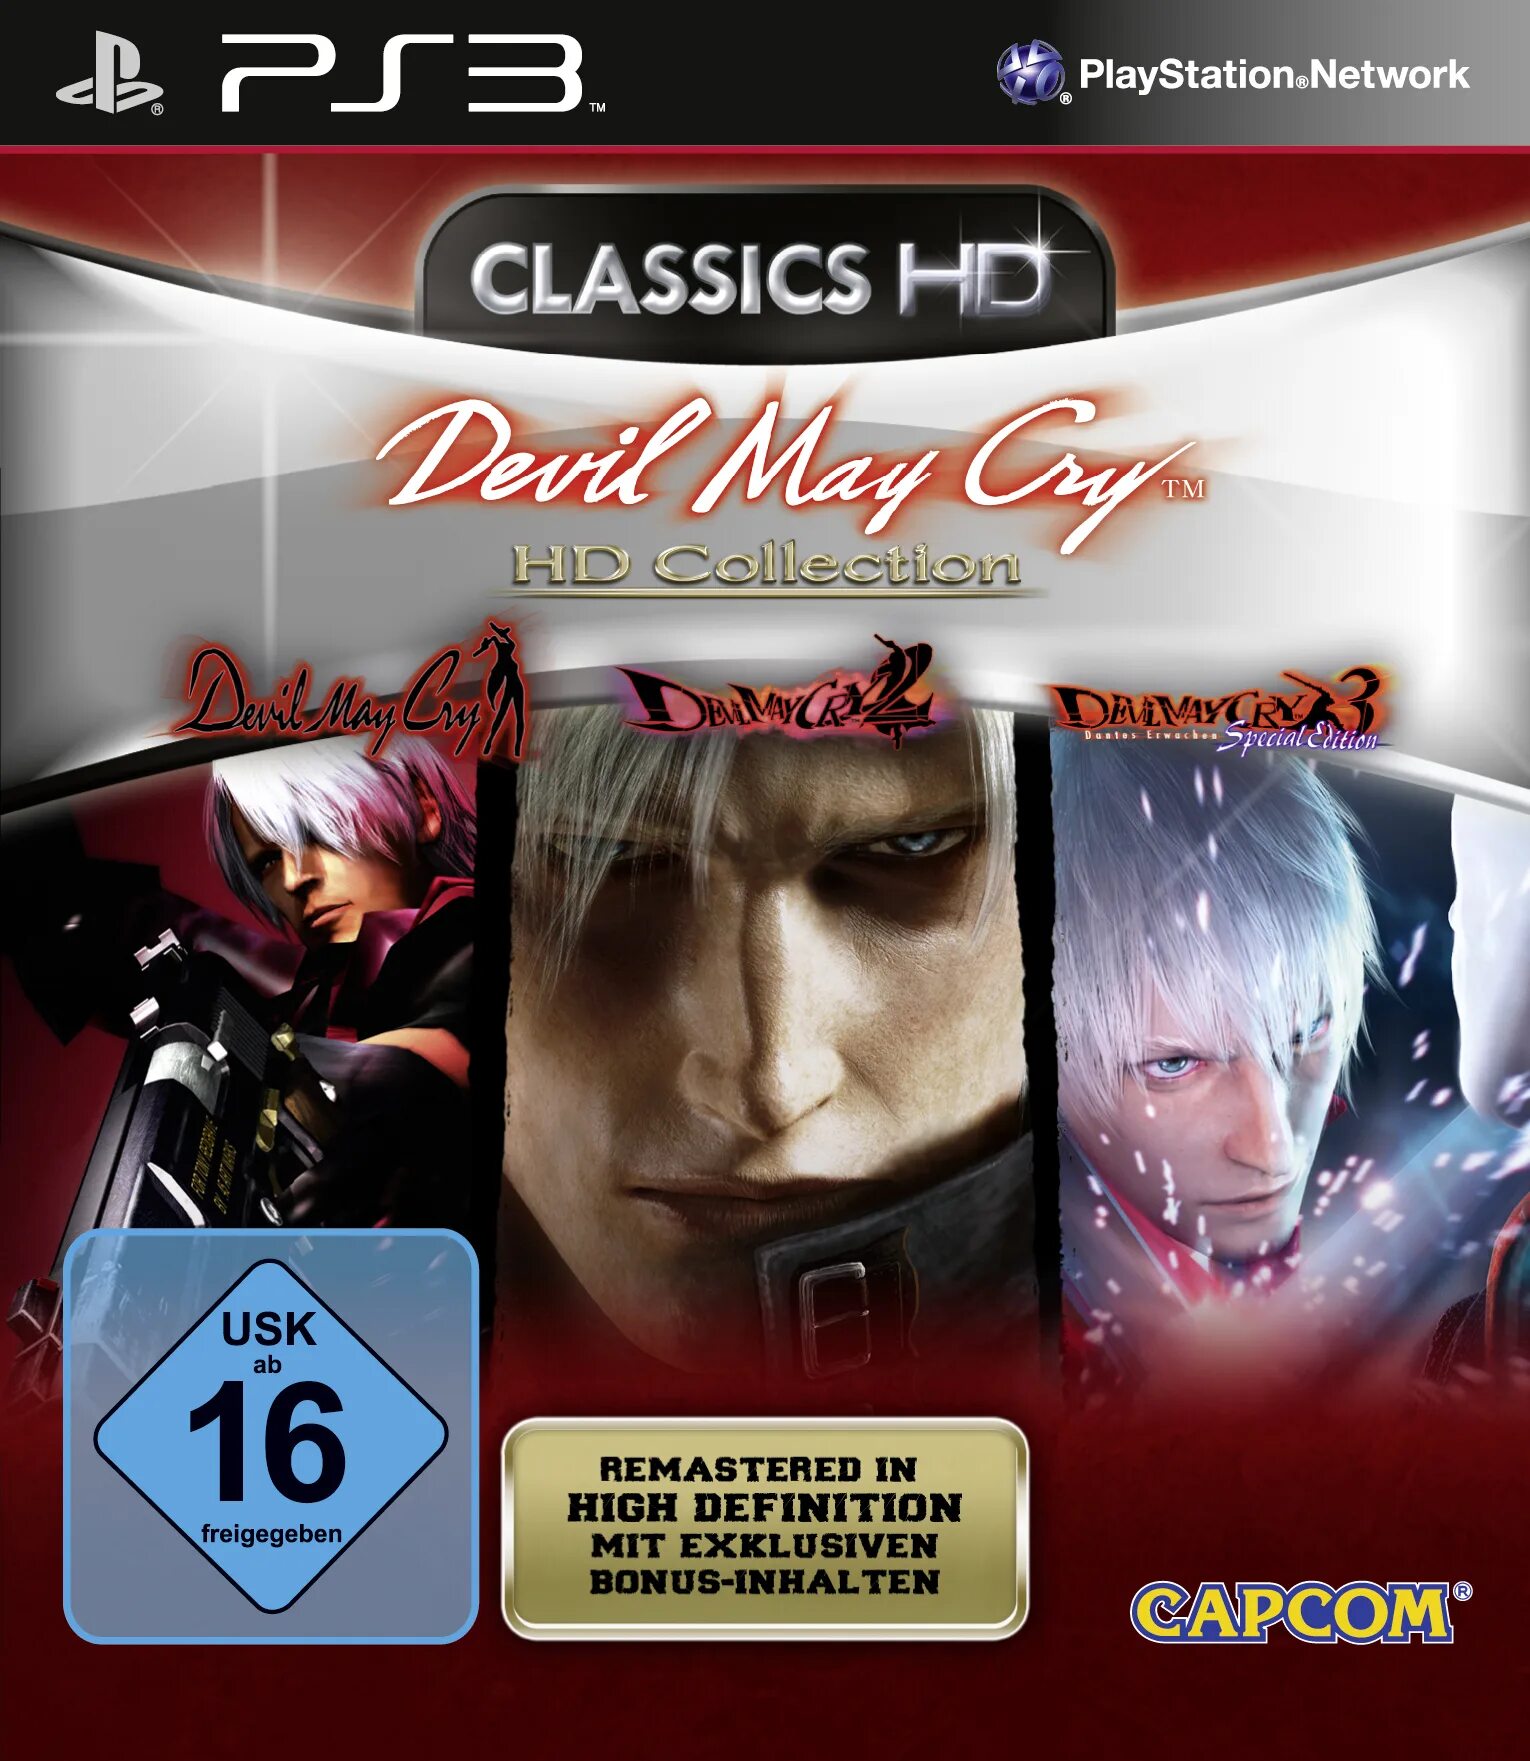 Devil May Cry ps3. Devil May Cry collection ps3. DMC 3 ps3.